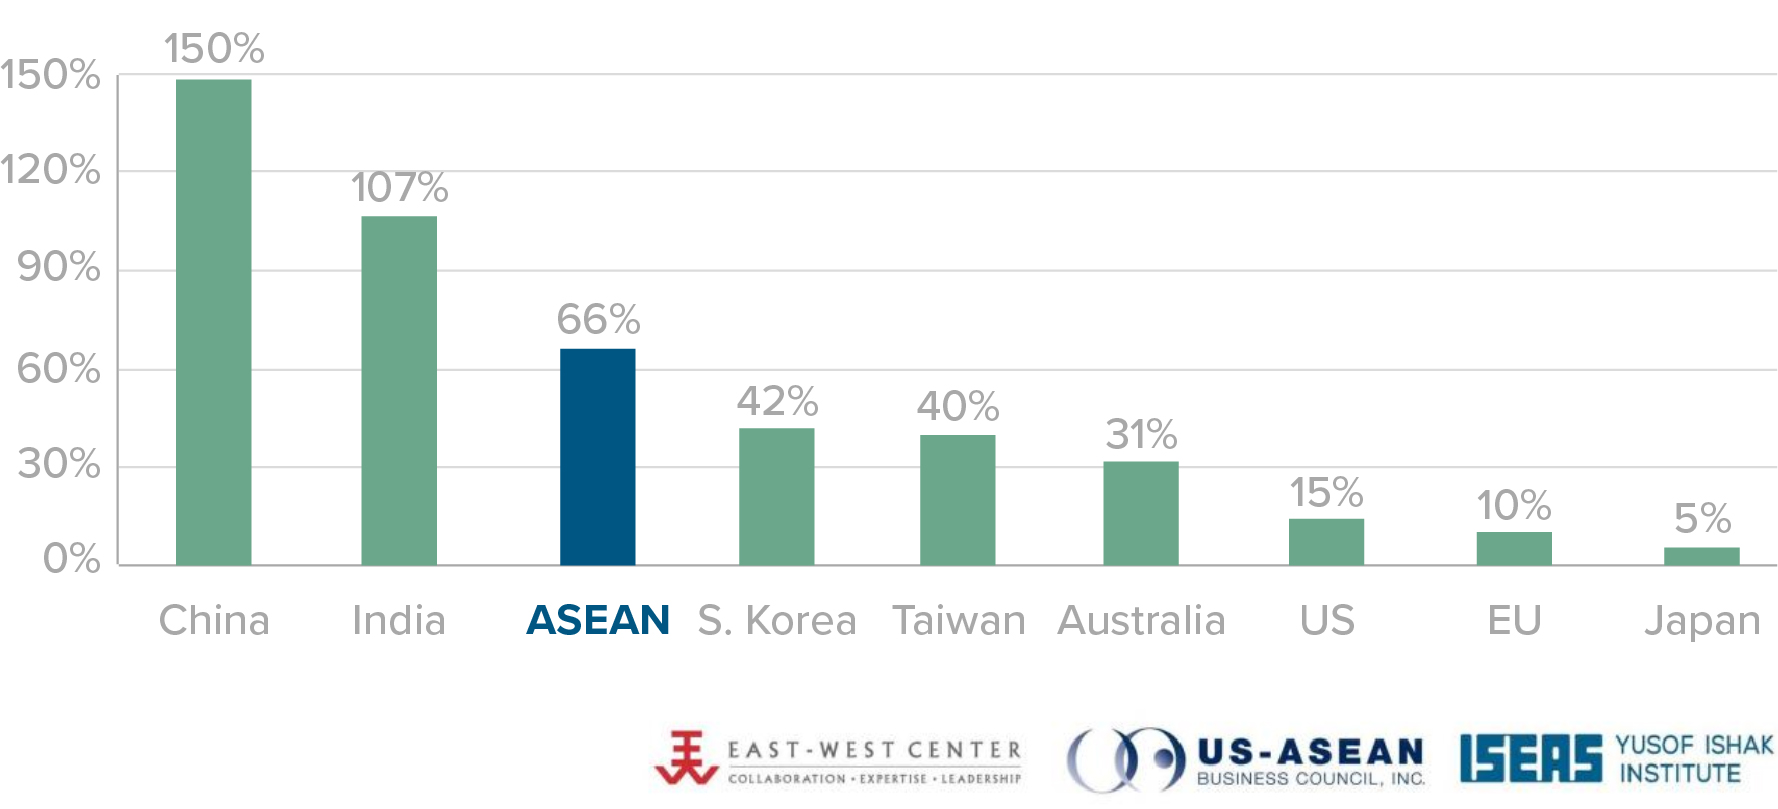 ASEAN's economic growth has outpaced that of many other regional and global economies. Source: http://www.asiamattersforamerica.org/